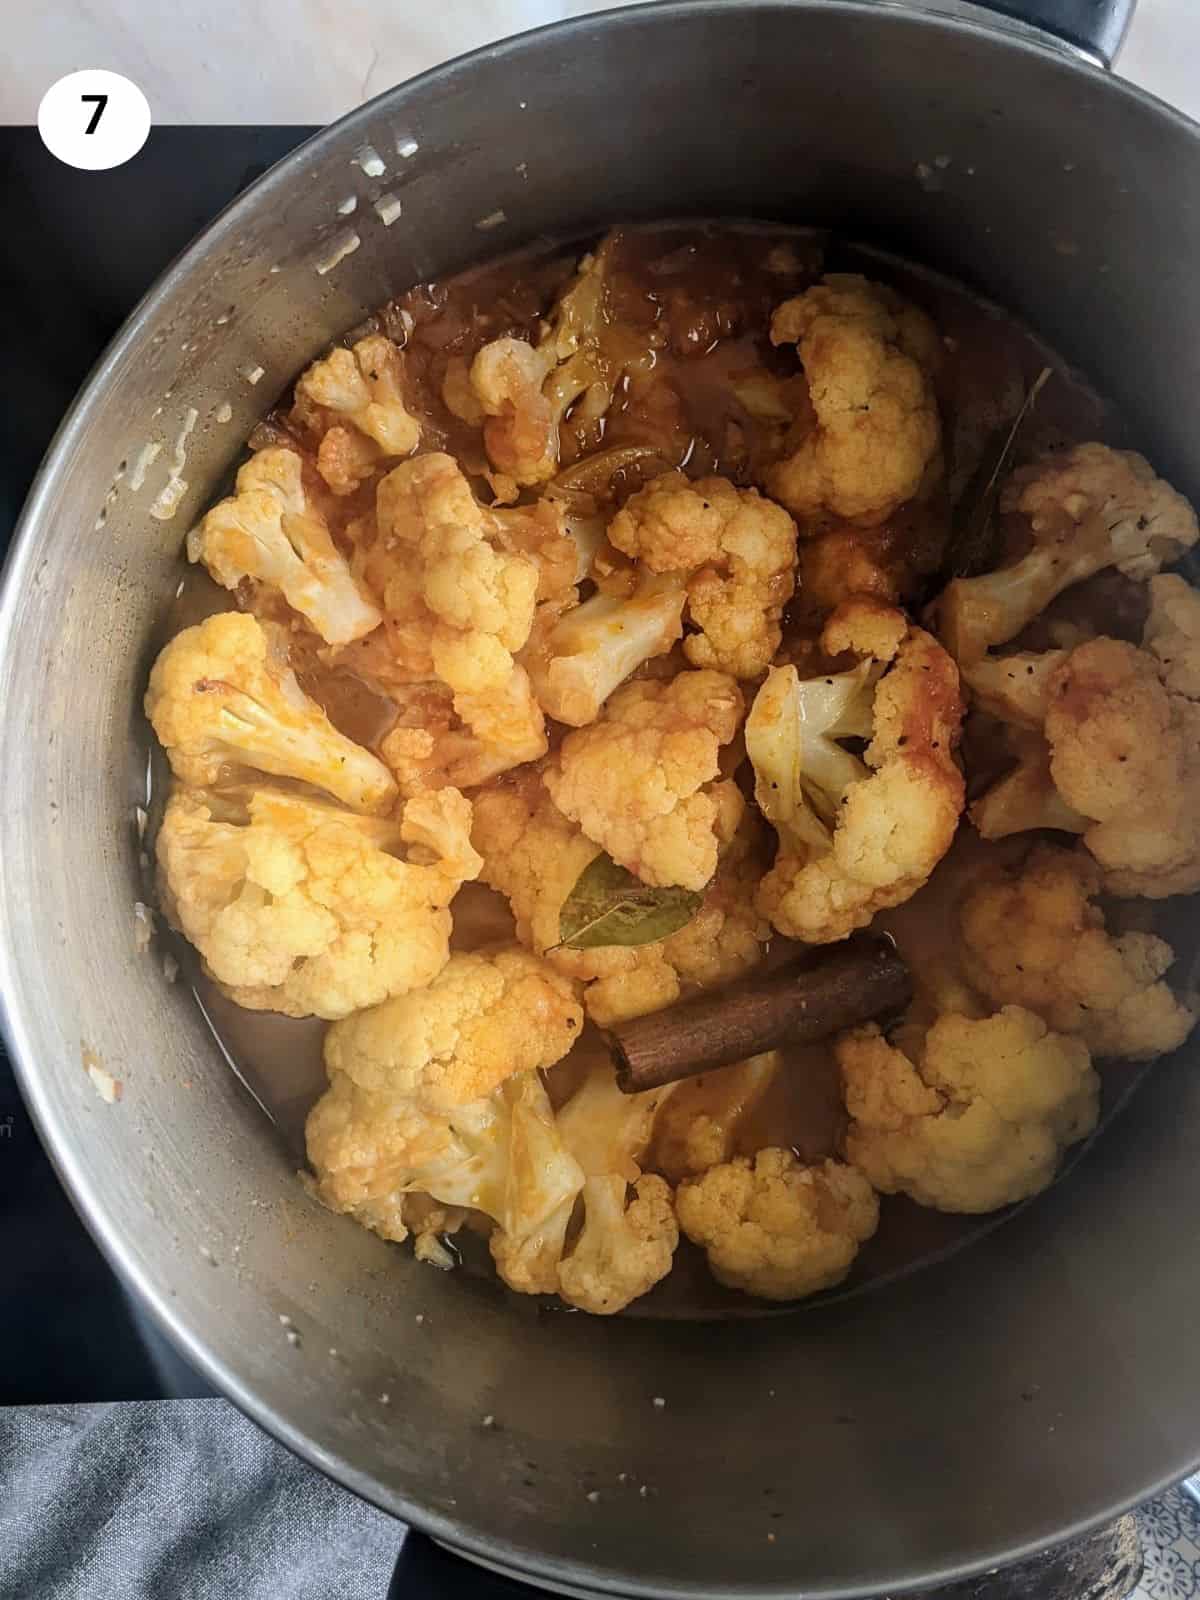 Braised cauliflower cooked in the pot.